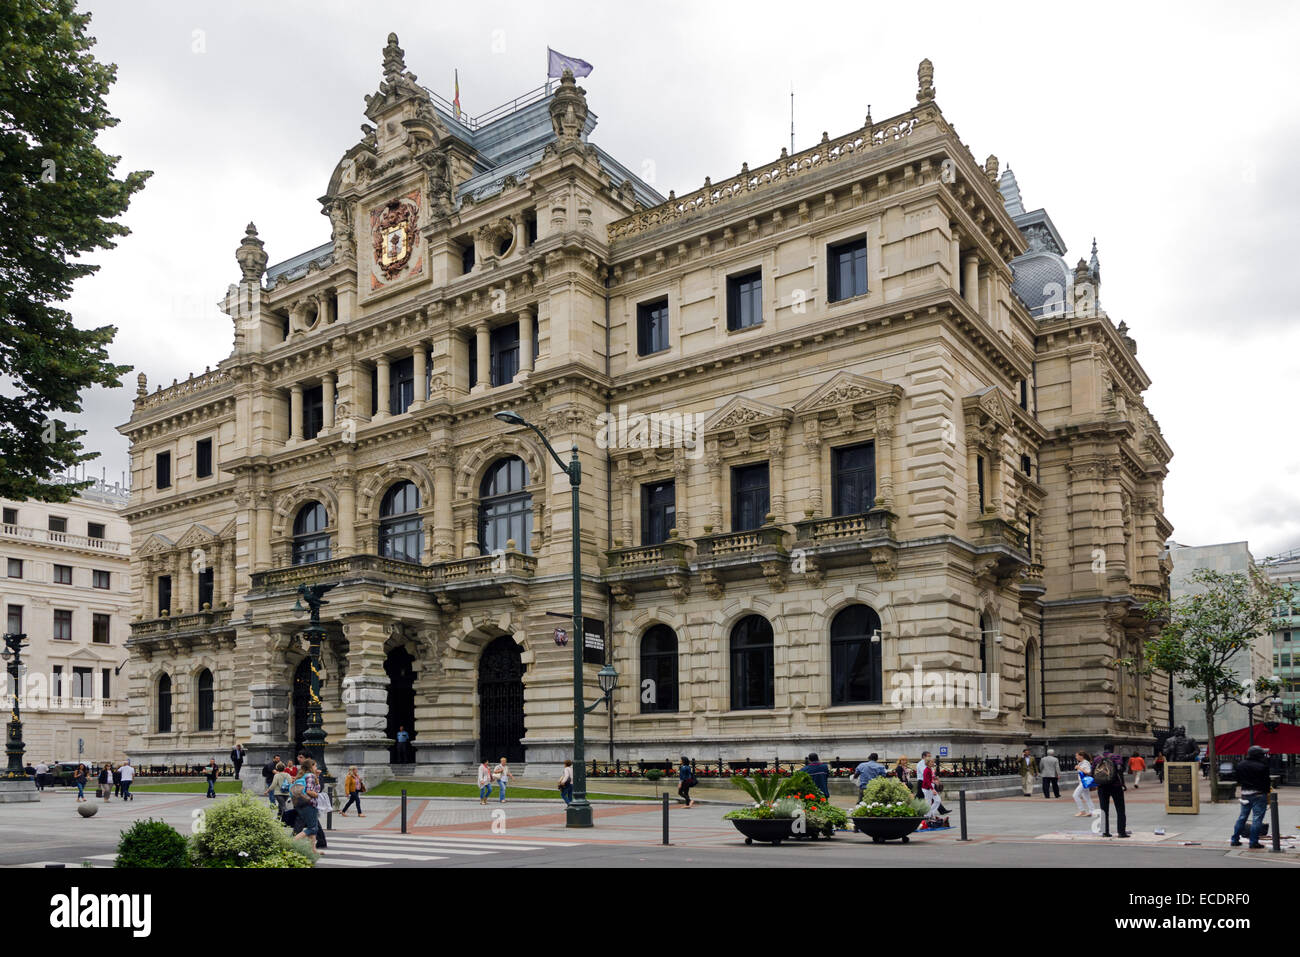 BILBAO, SPAIN - JULY 4, 2013: Palace of the Provincial Council of Biscay, Bilbao. This is the government of the province of Bisc Stock Photo